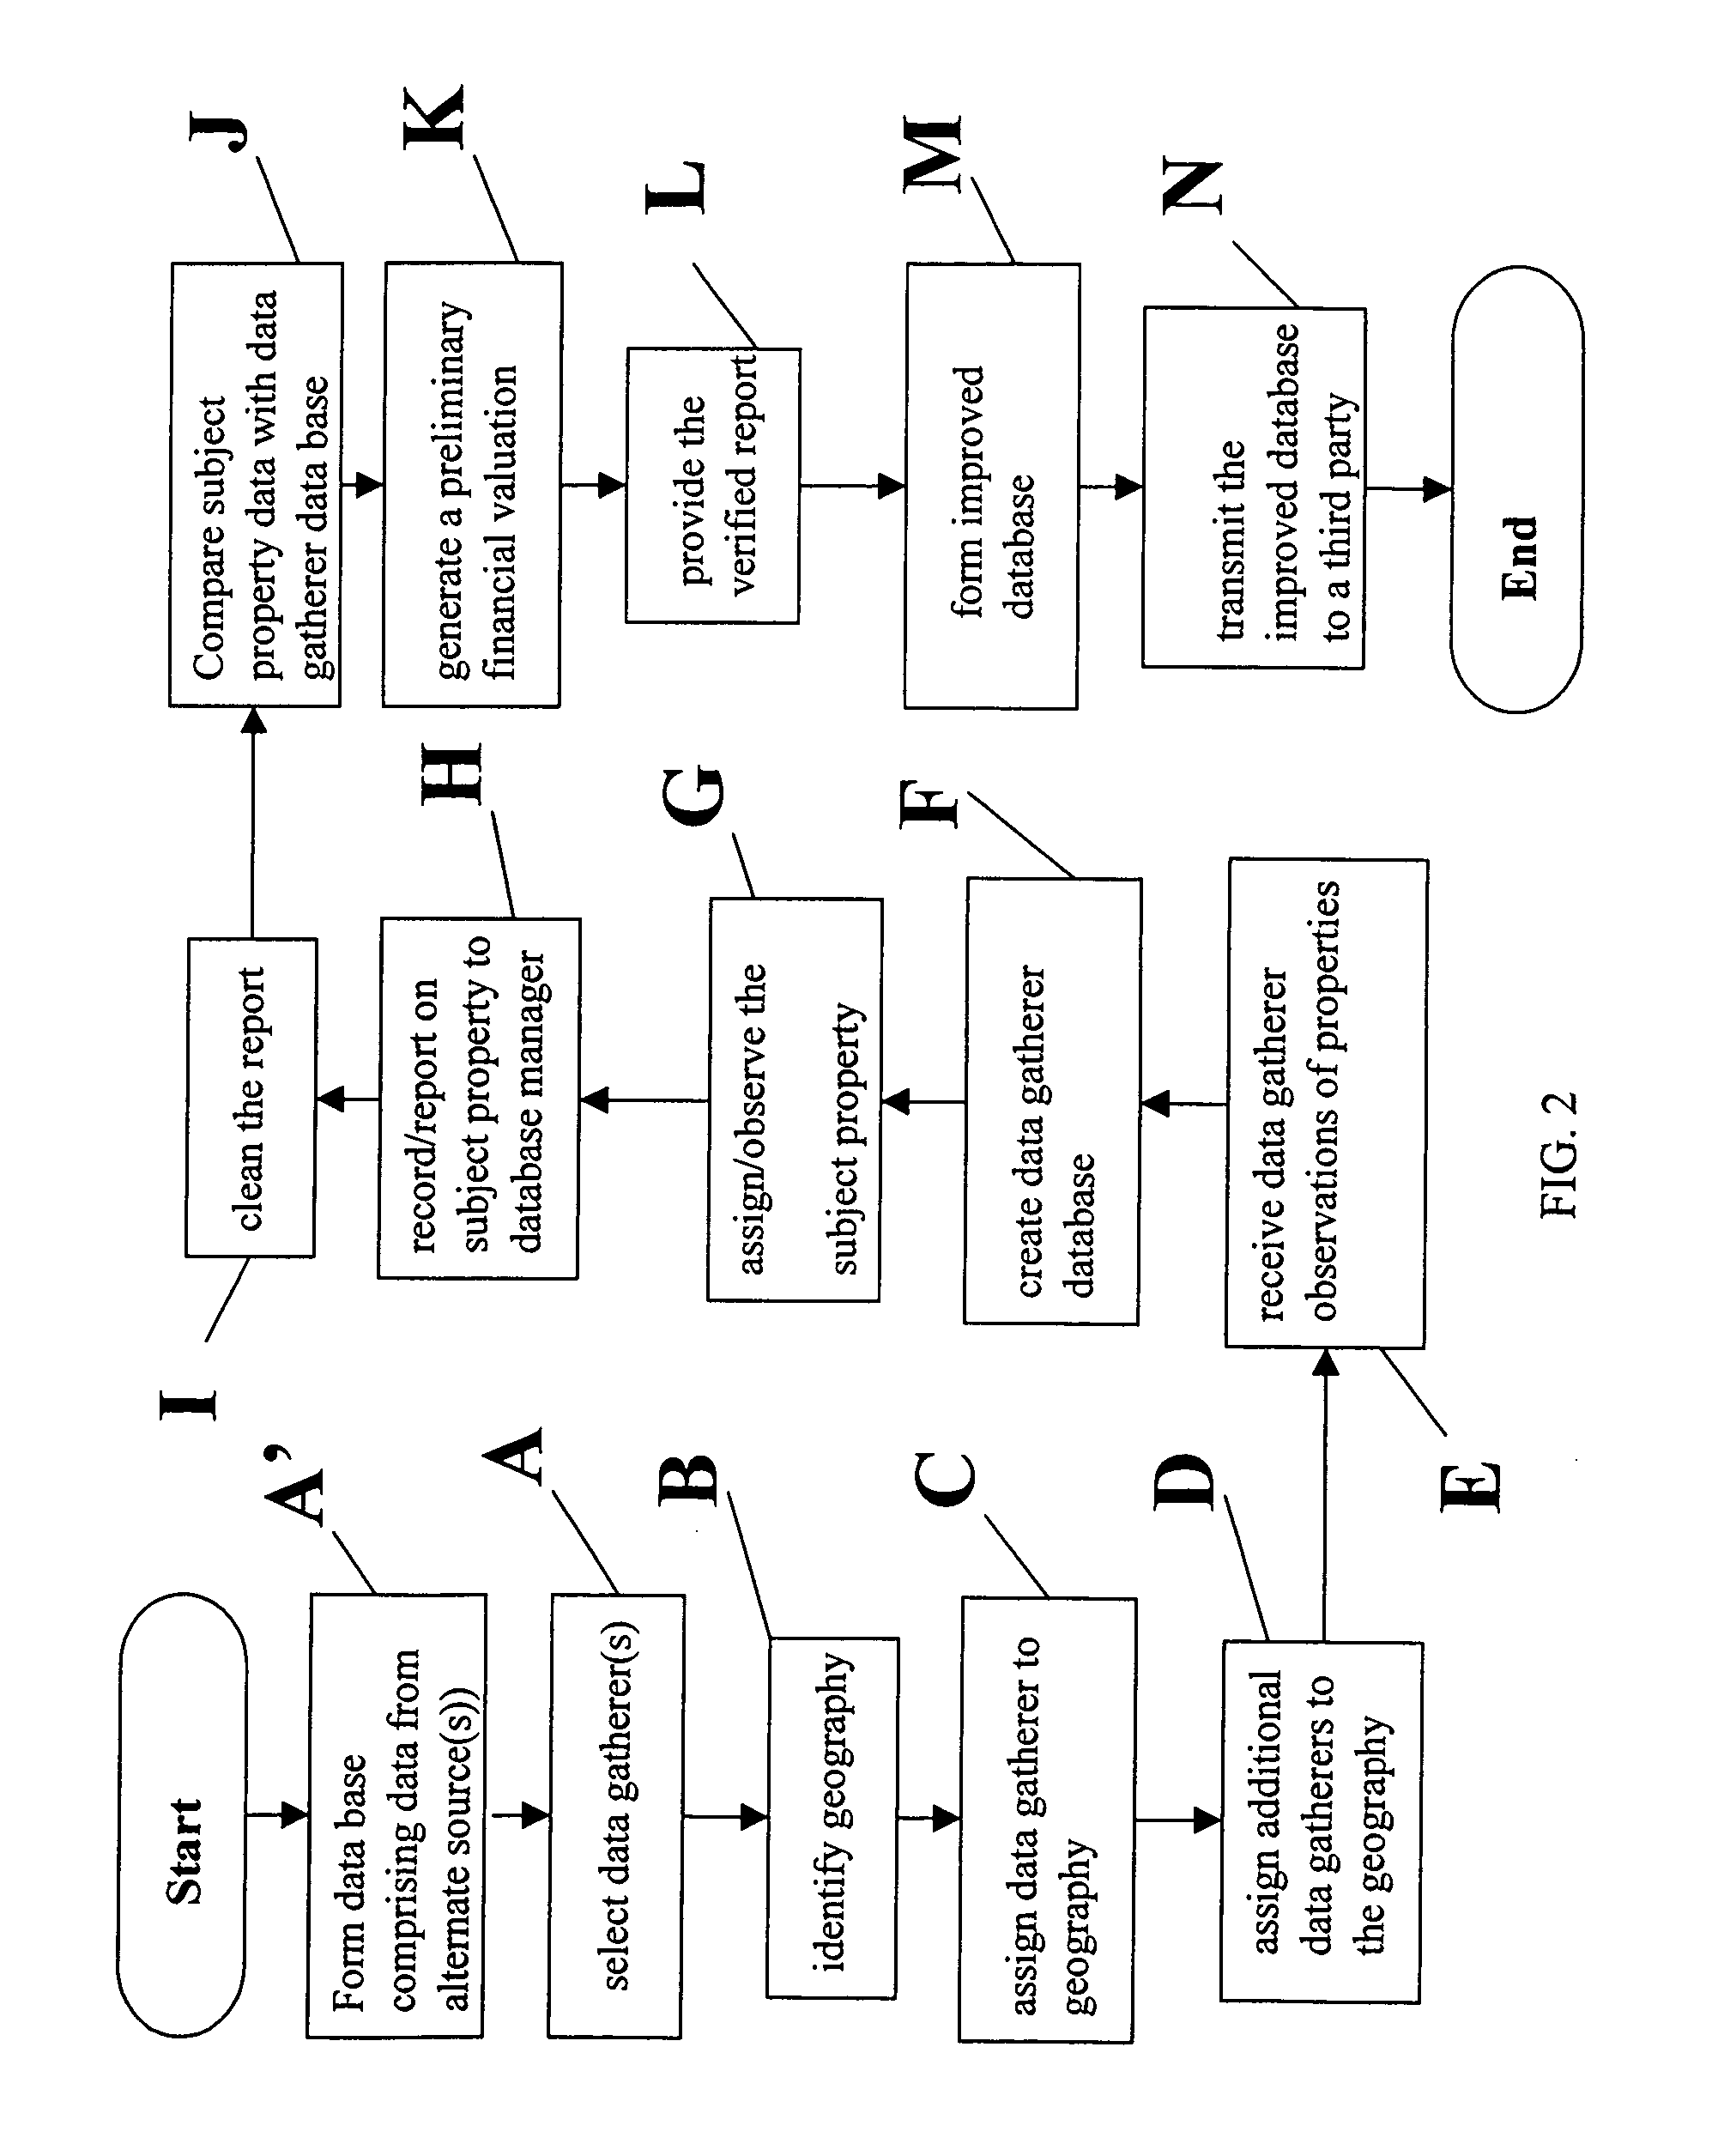 Method and system for financial evaluation of real estate properties